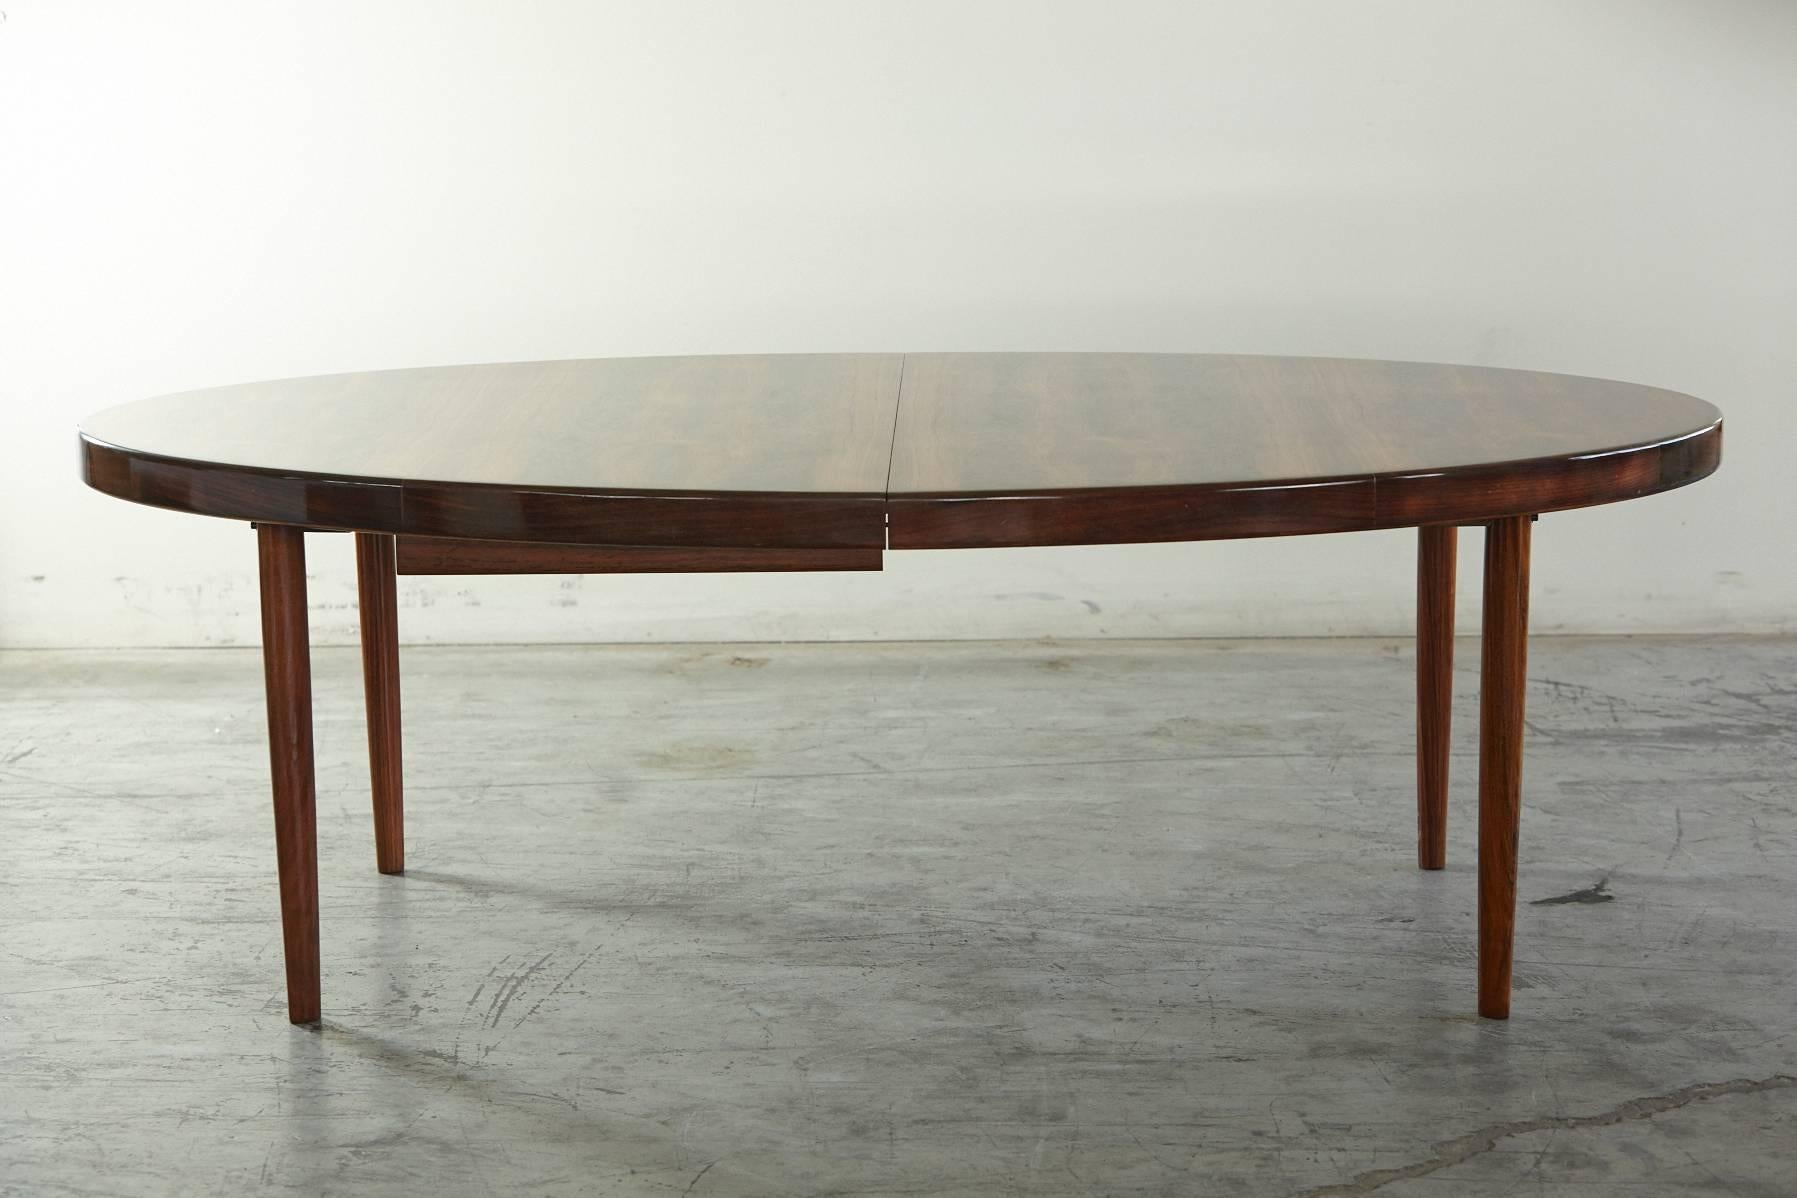 Truly rare and stunning rosewood table. Extremely functional with butterfly extension in the center, making it very sizeable and creating an impressive look.
Width fully extended with two leafs 107.5